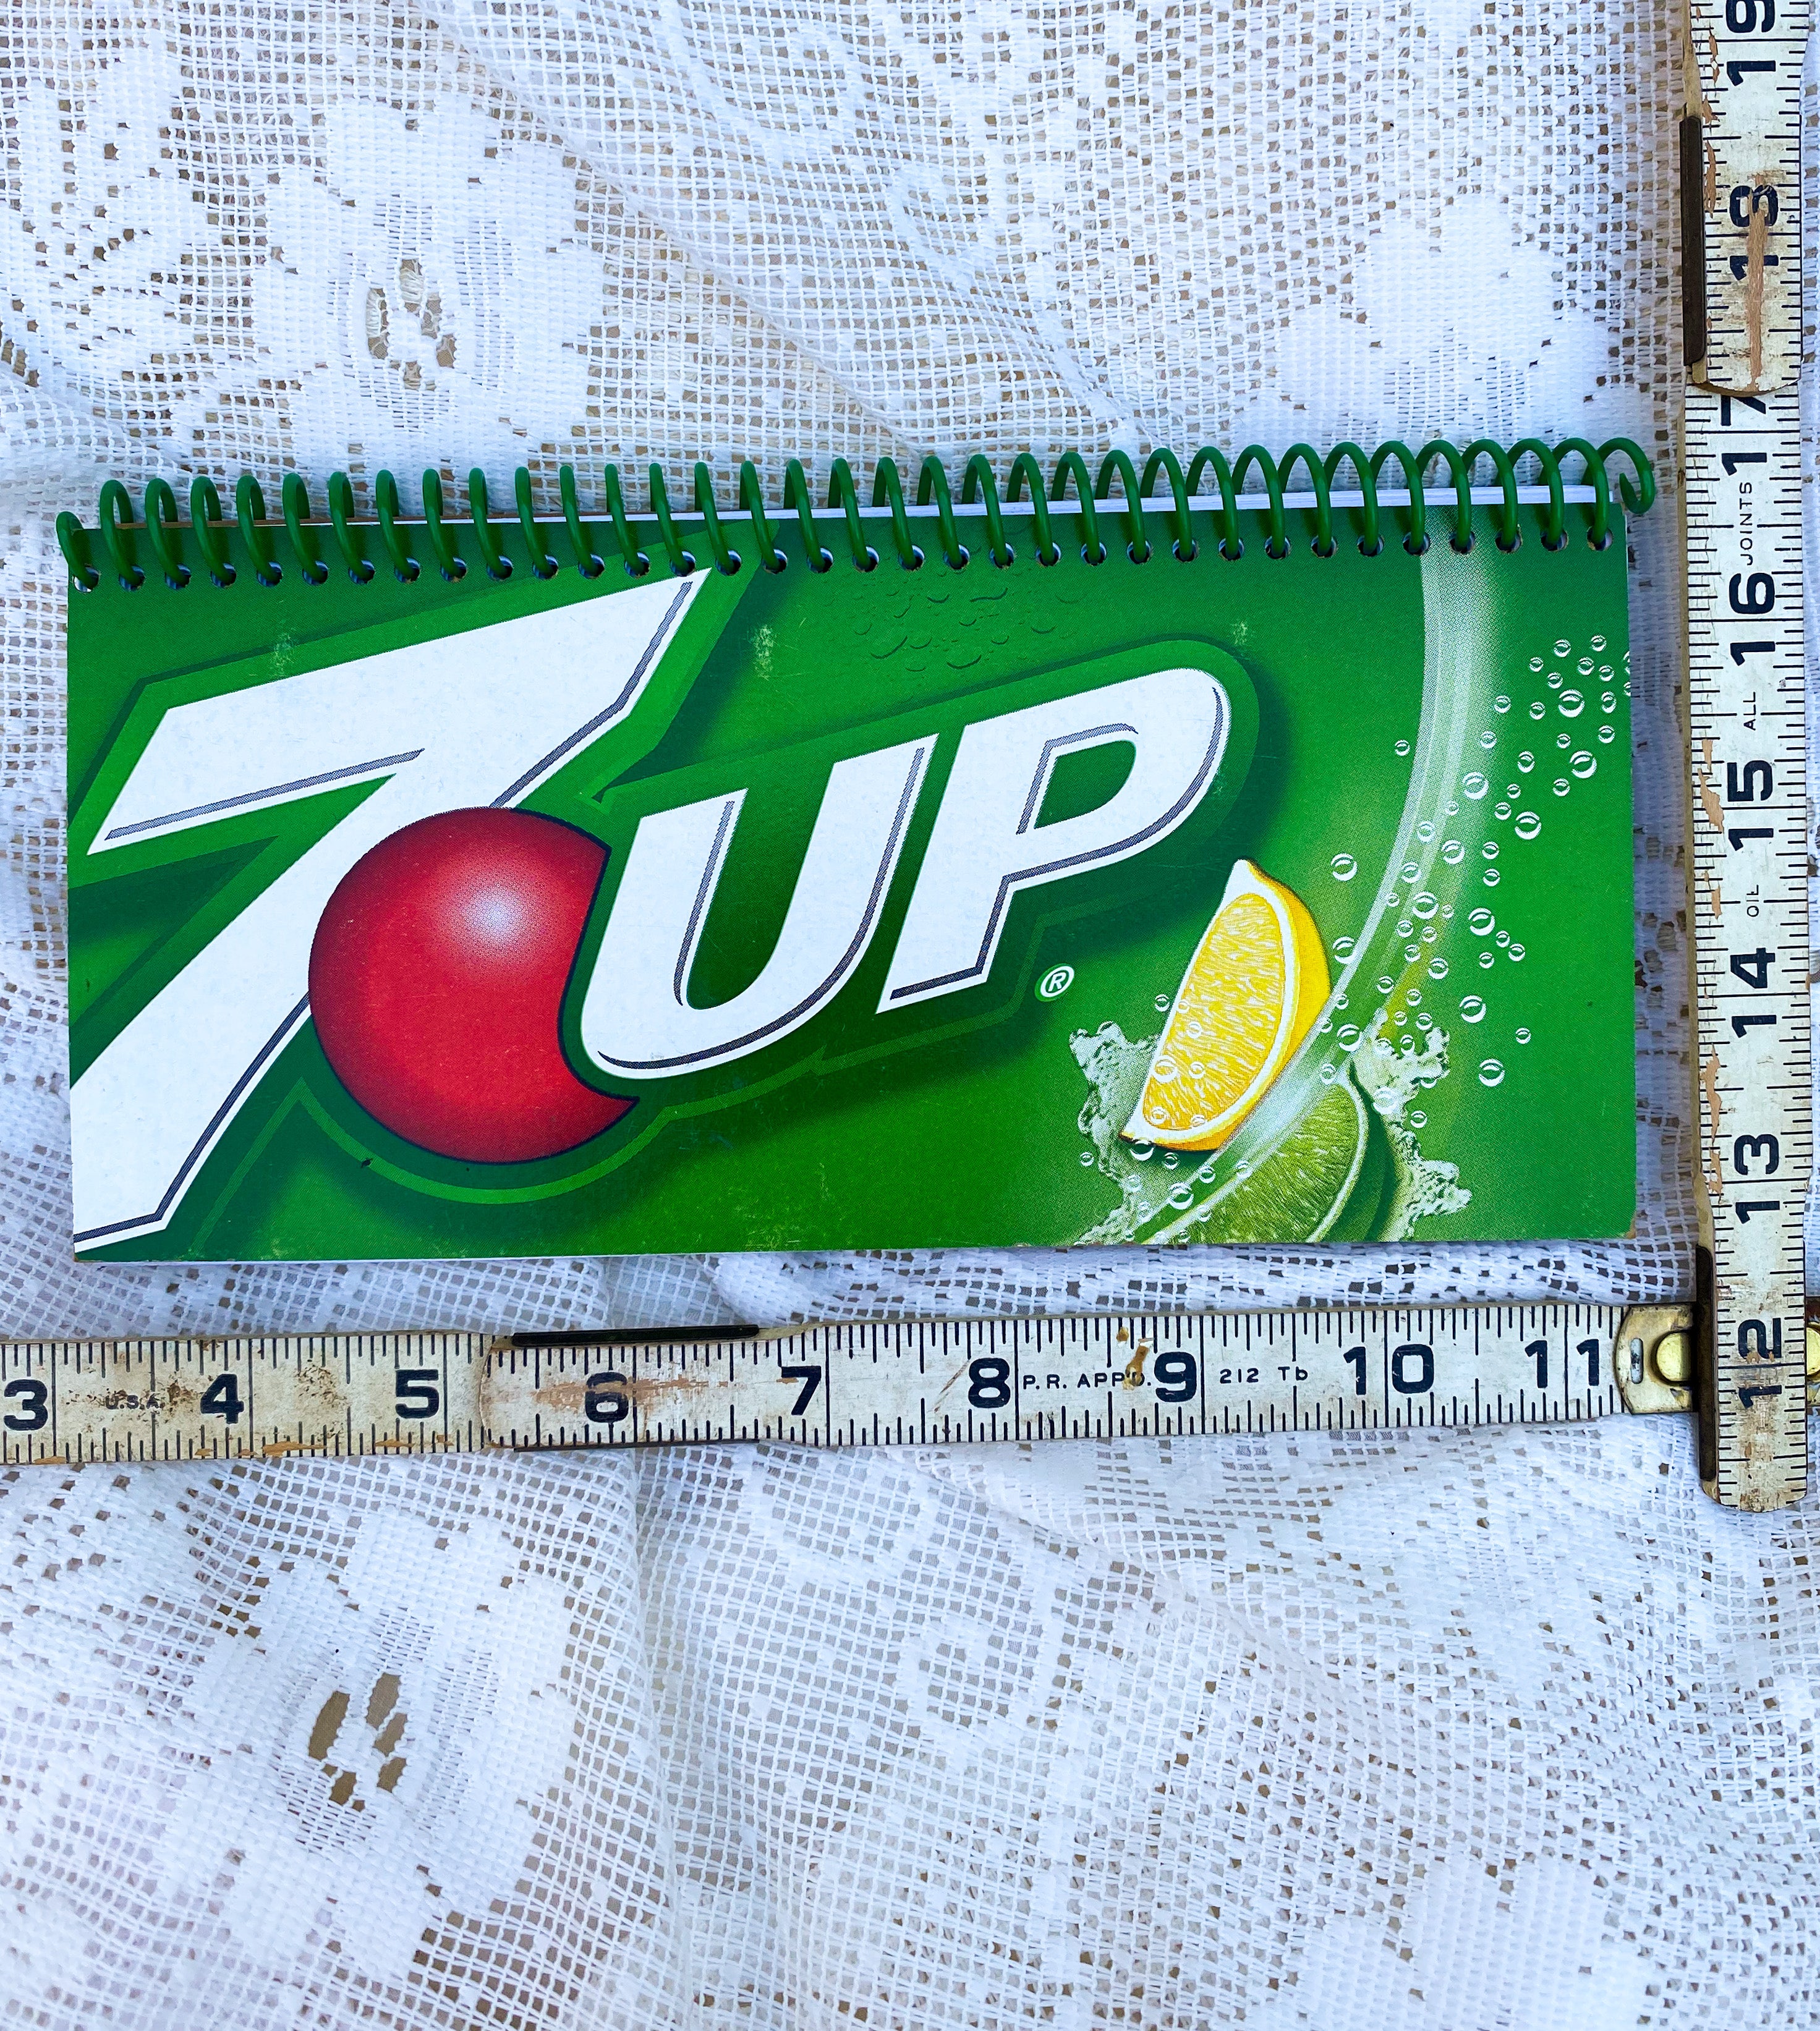 7UP Upcycled Spiral Notebook